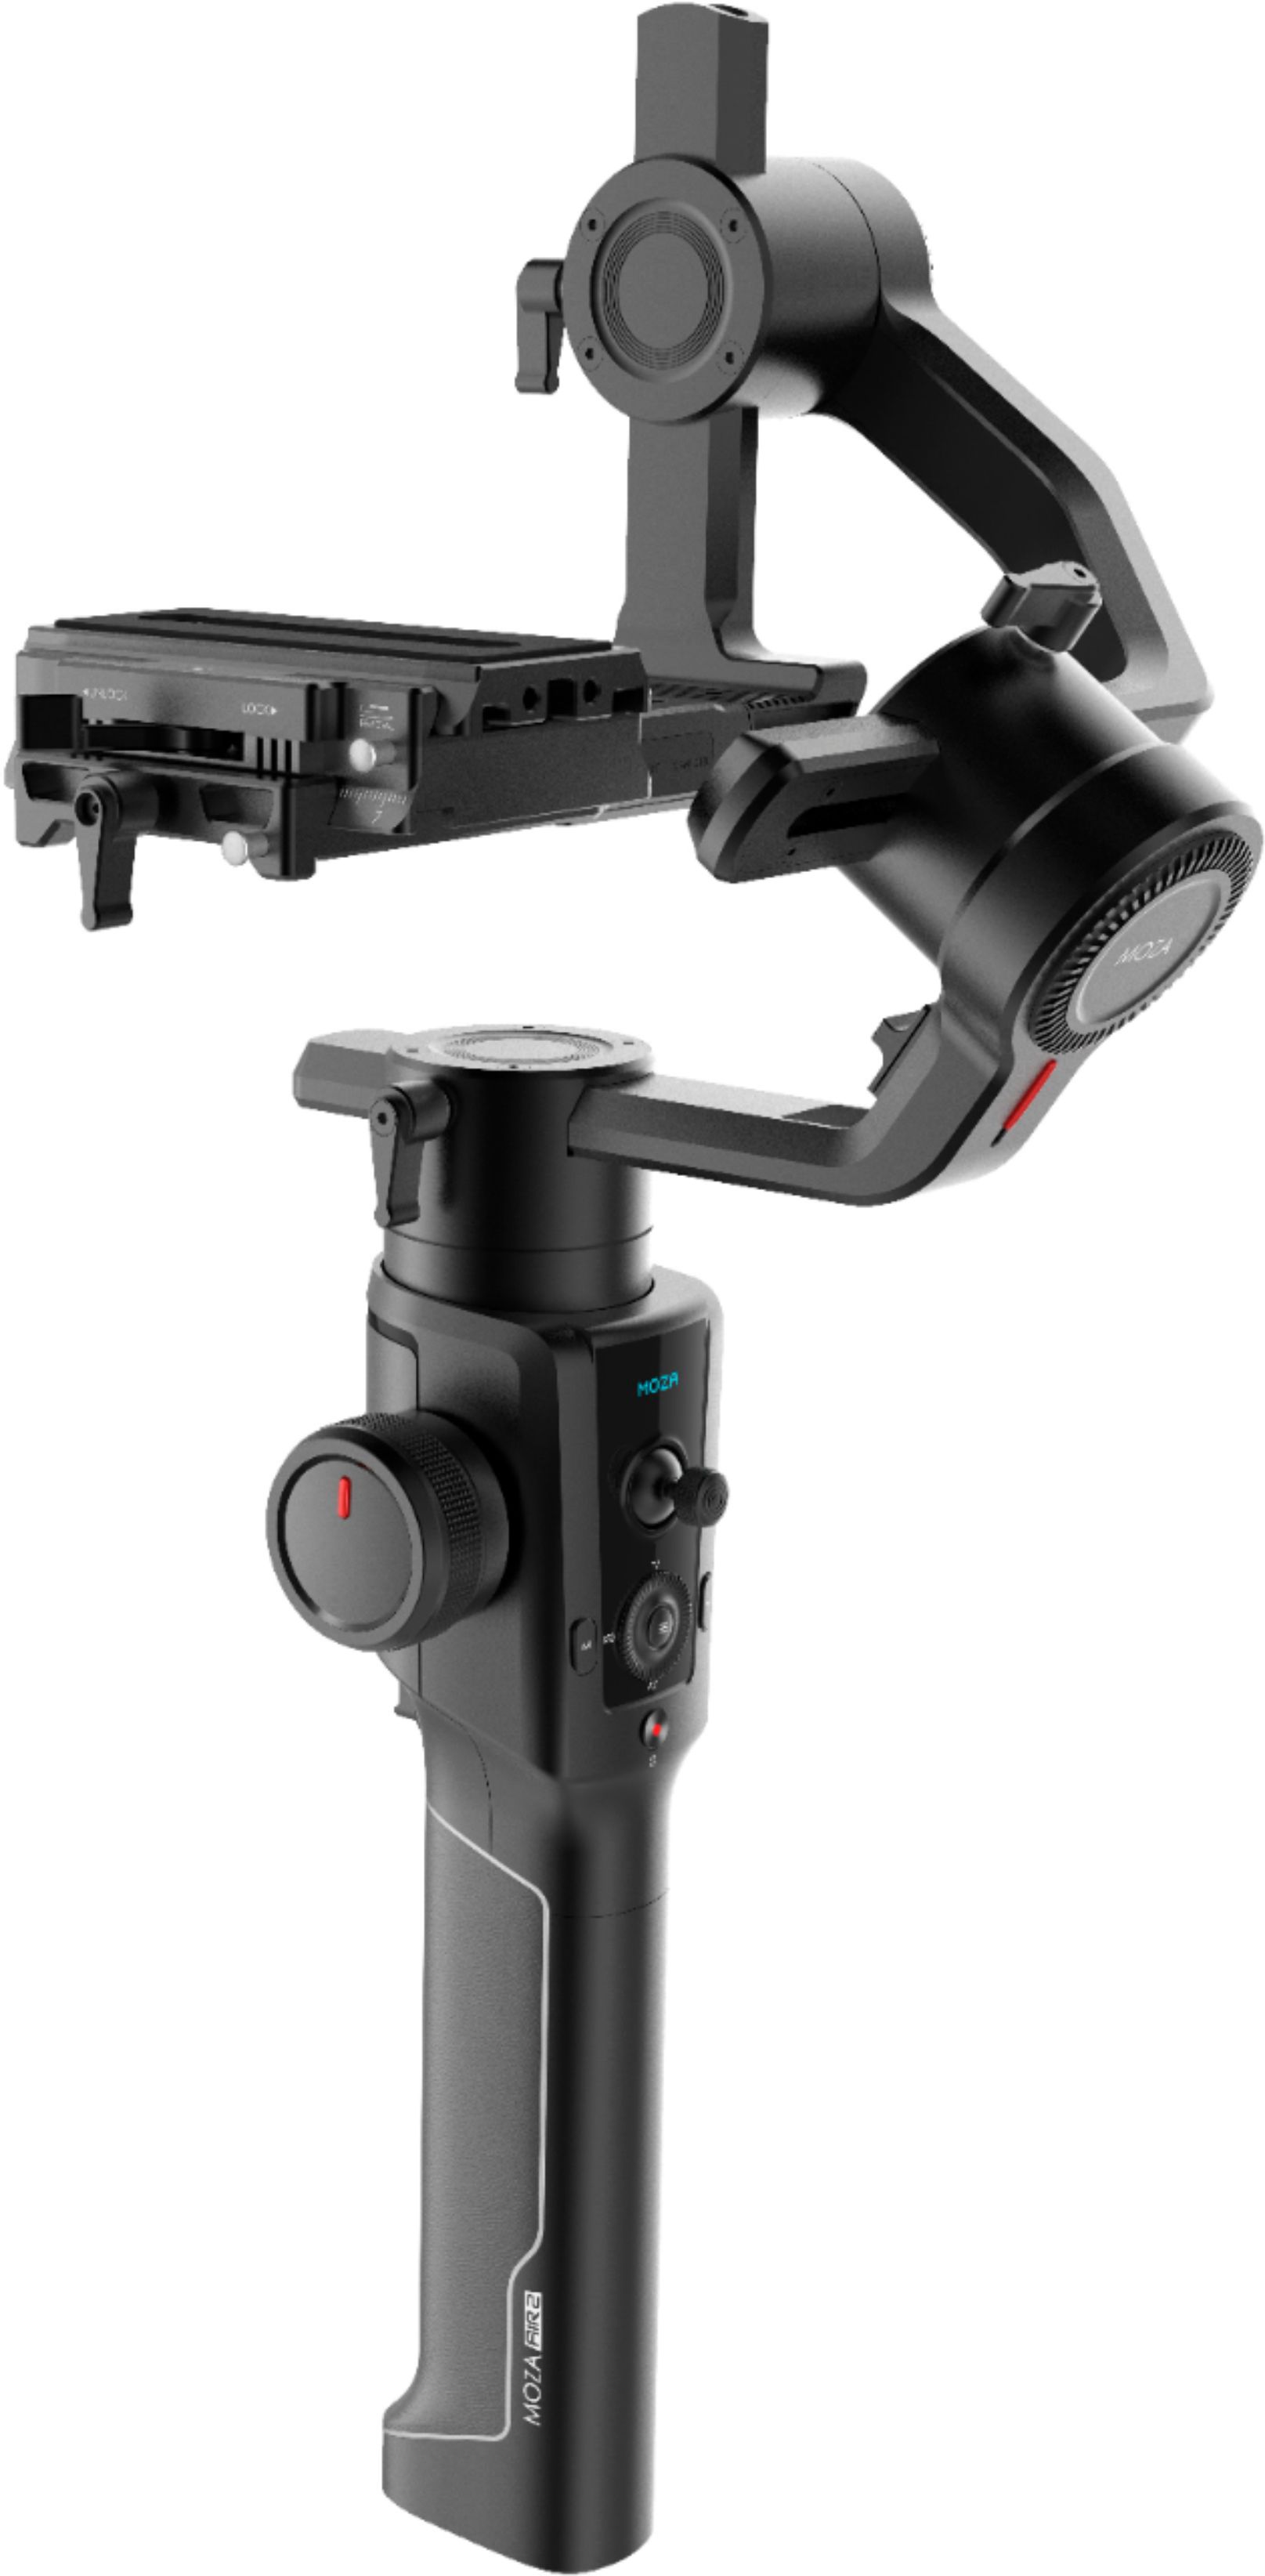 Left View: Moza - Air 2 3-Axis Handheld Gimbal Stabilizer for DSLR and Mirrorless Cameras